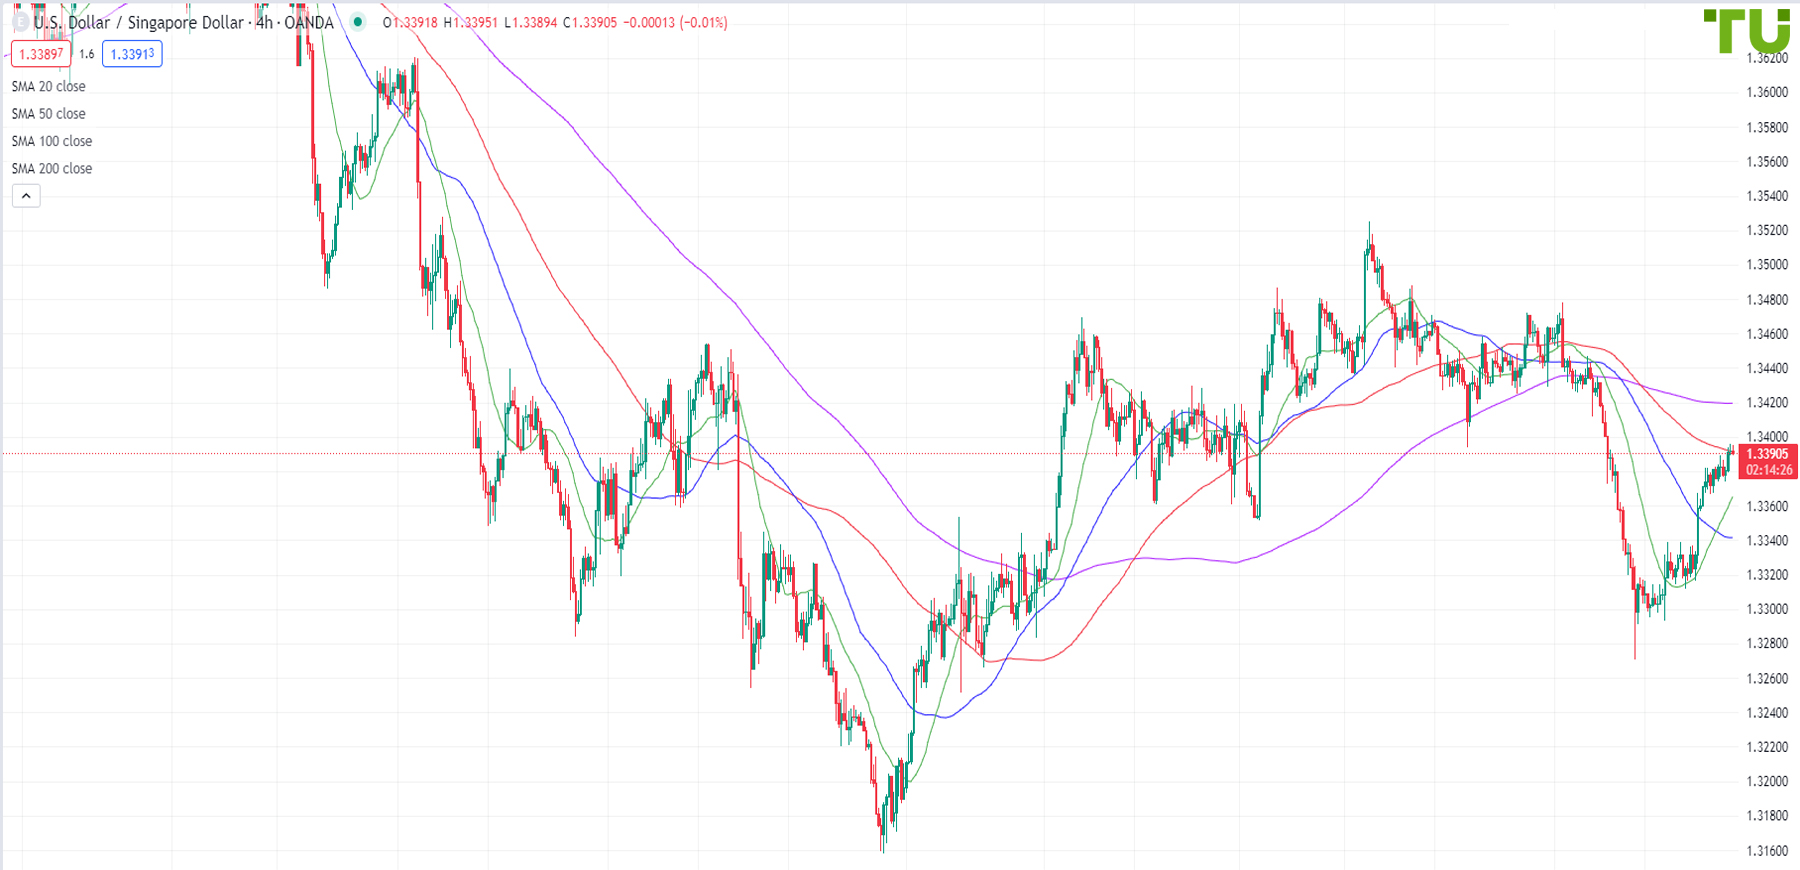 USD/SGD moves higher